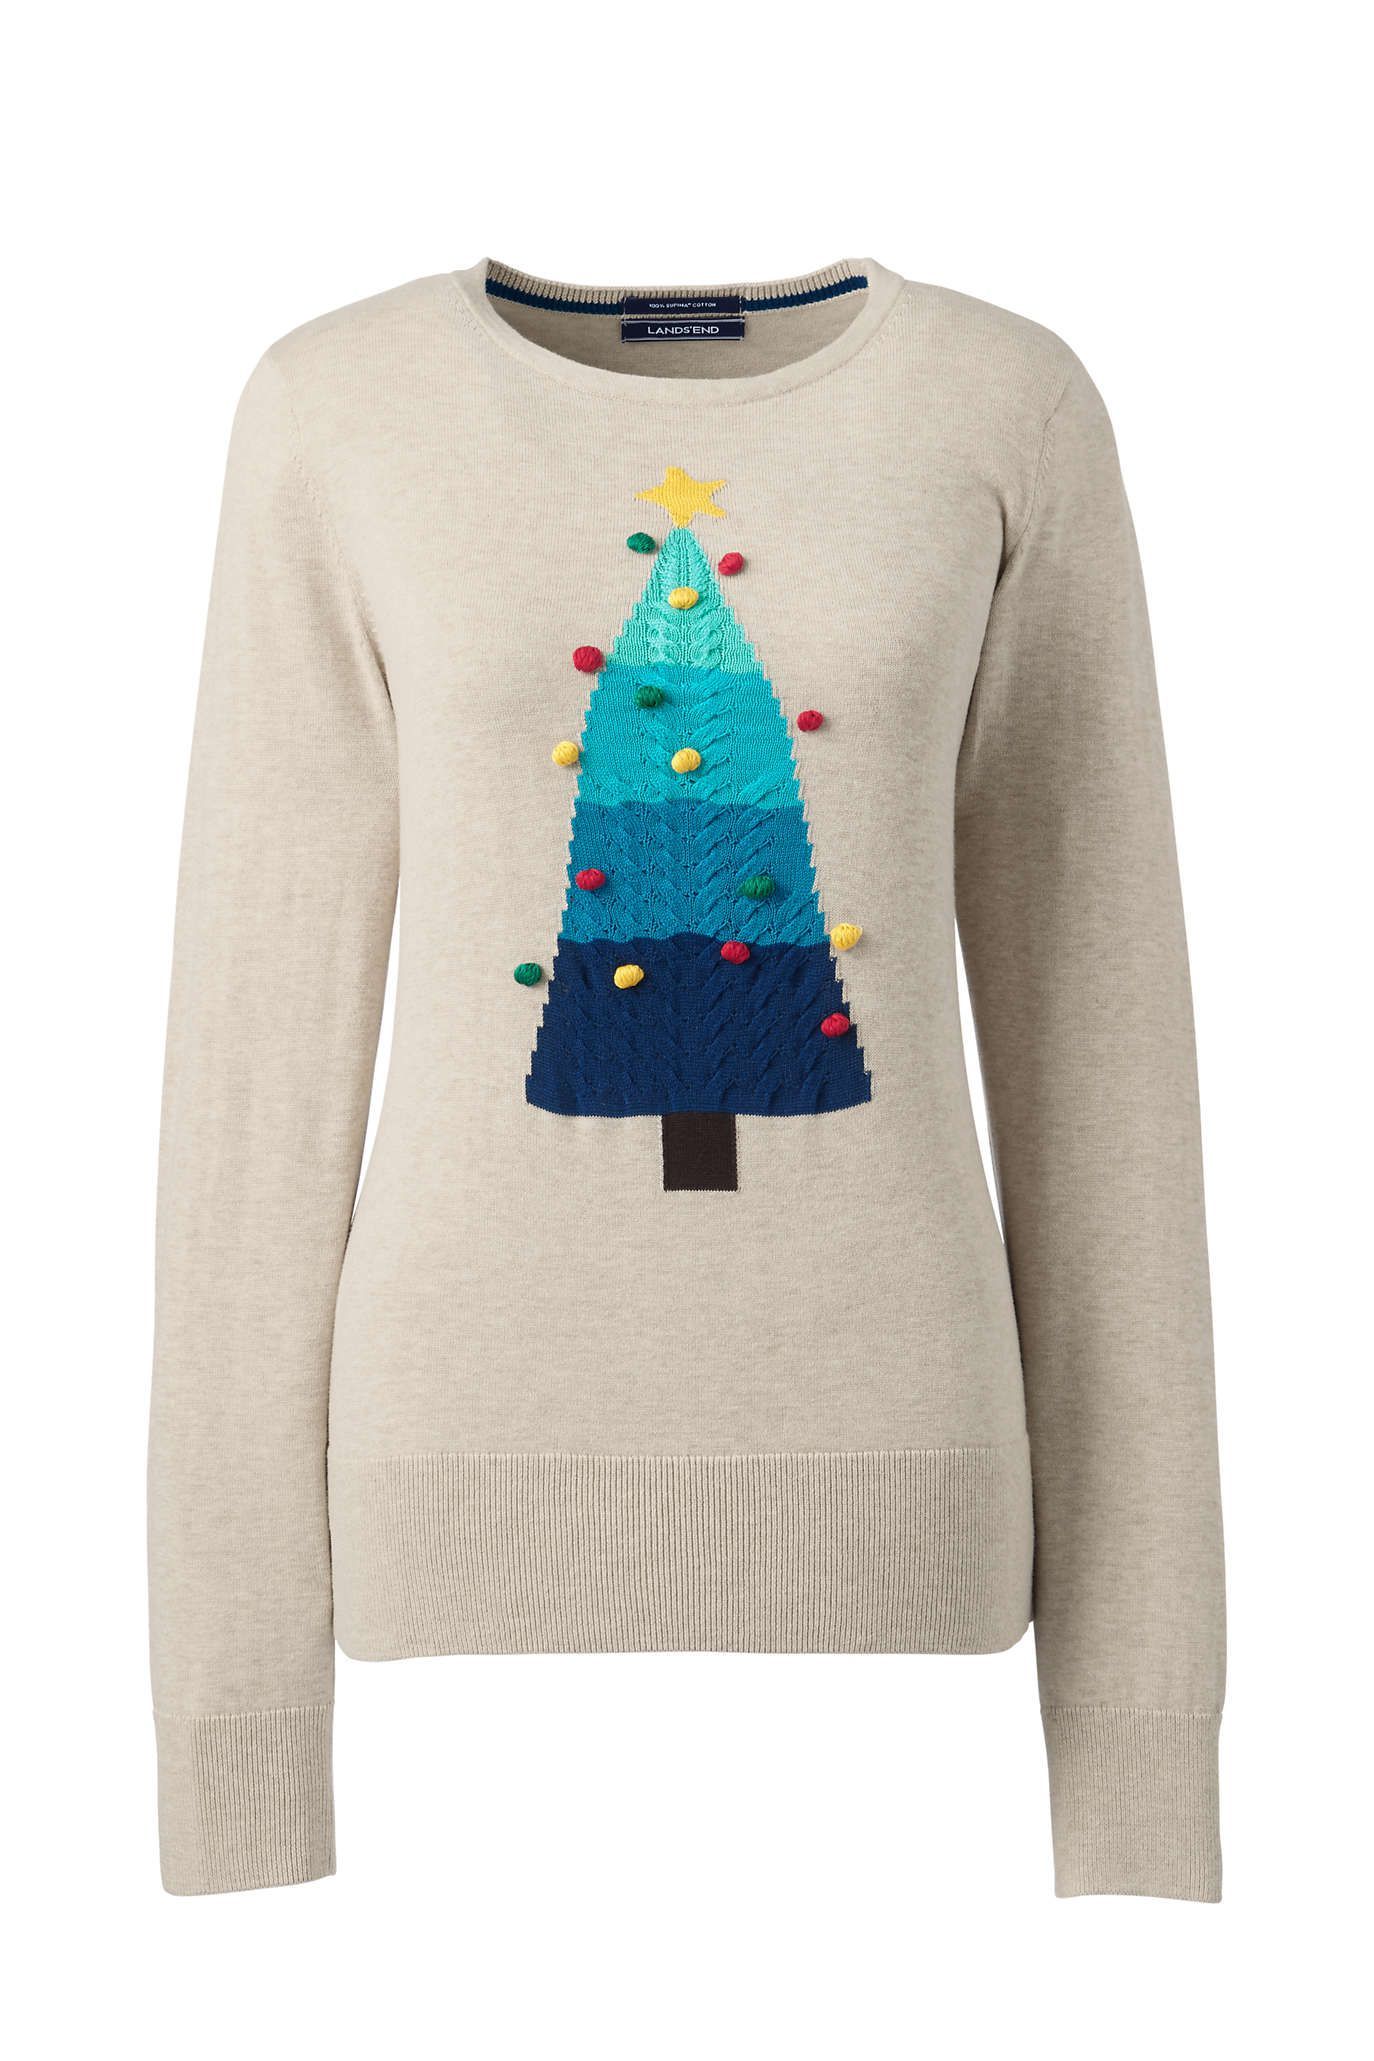 happy little trees christmas sweater